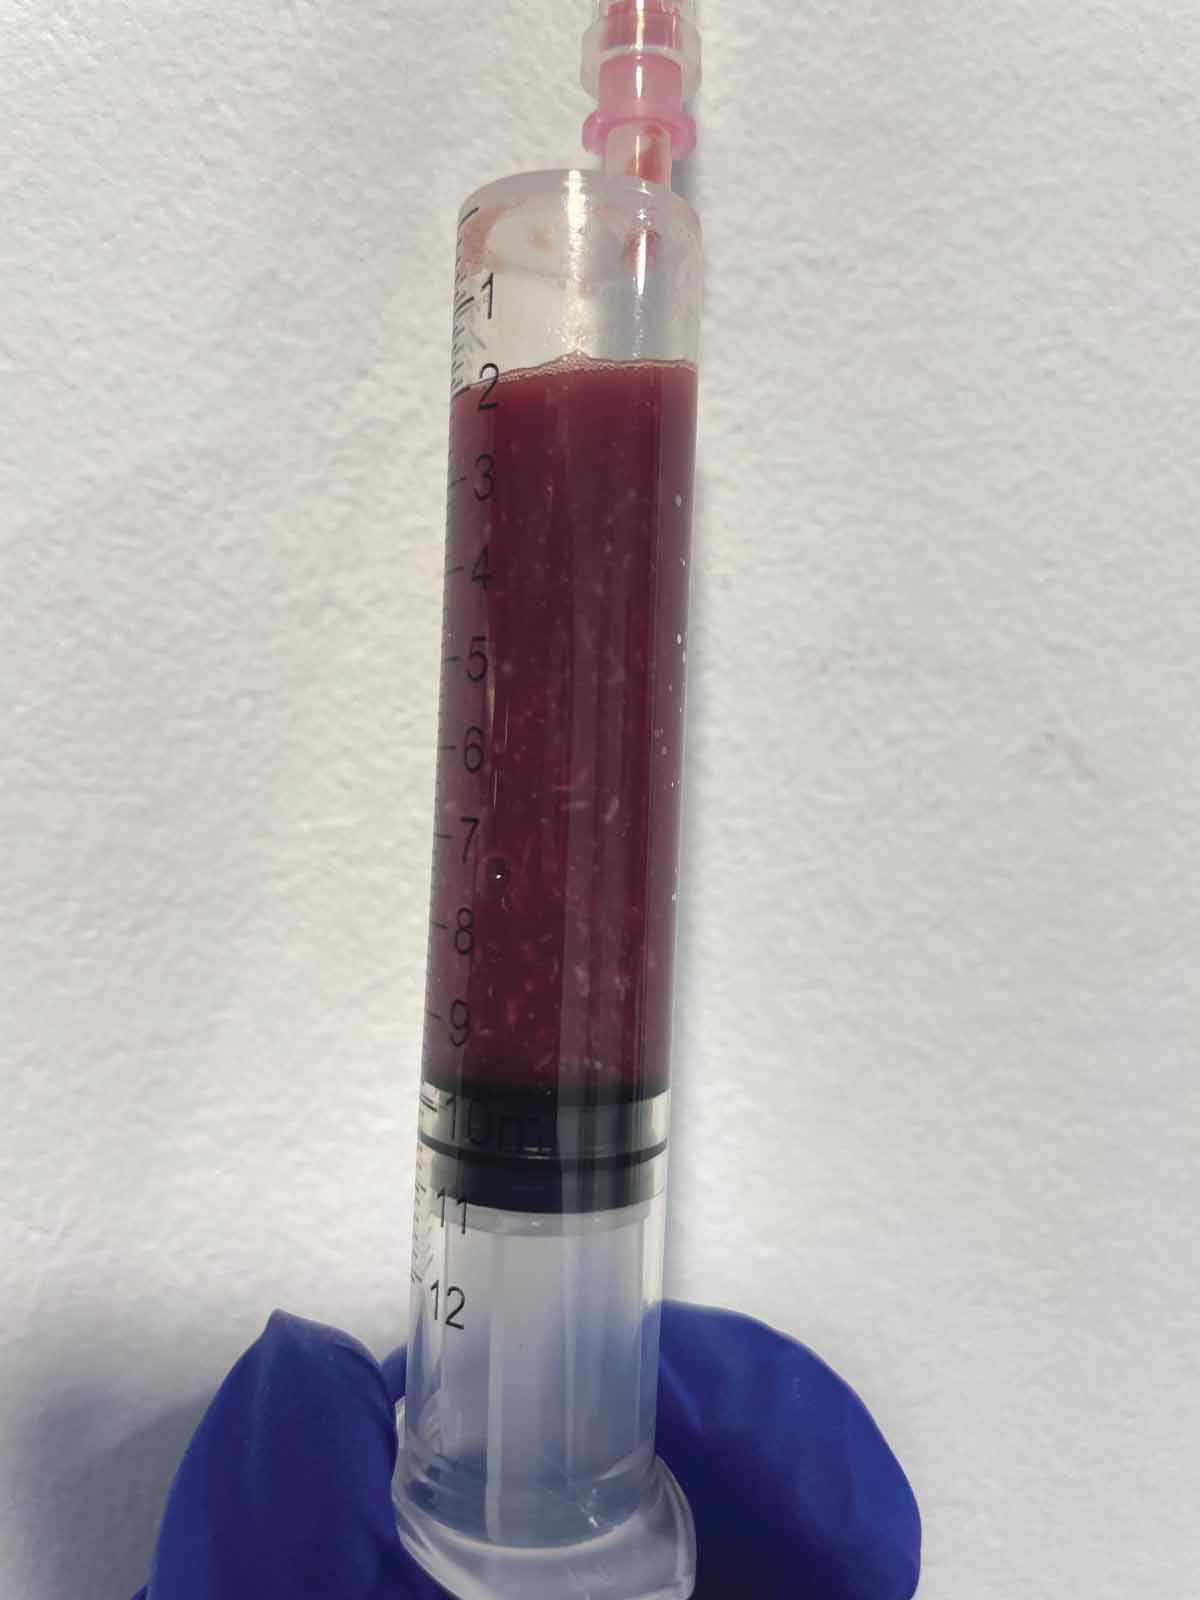 Sample obtained by abdominocentesis in a patient with septic abdomen